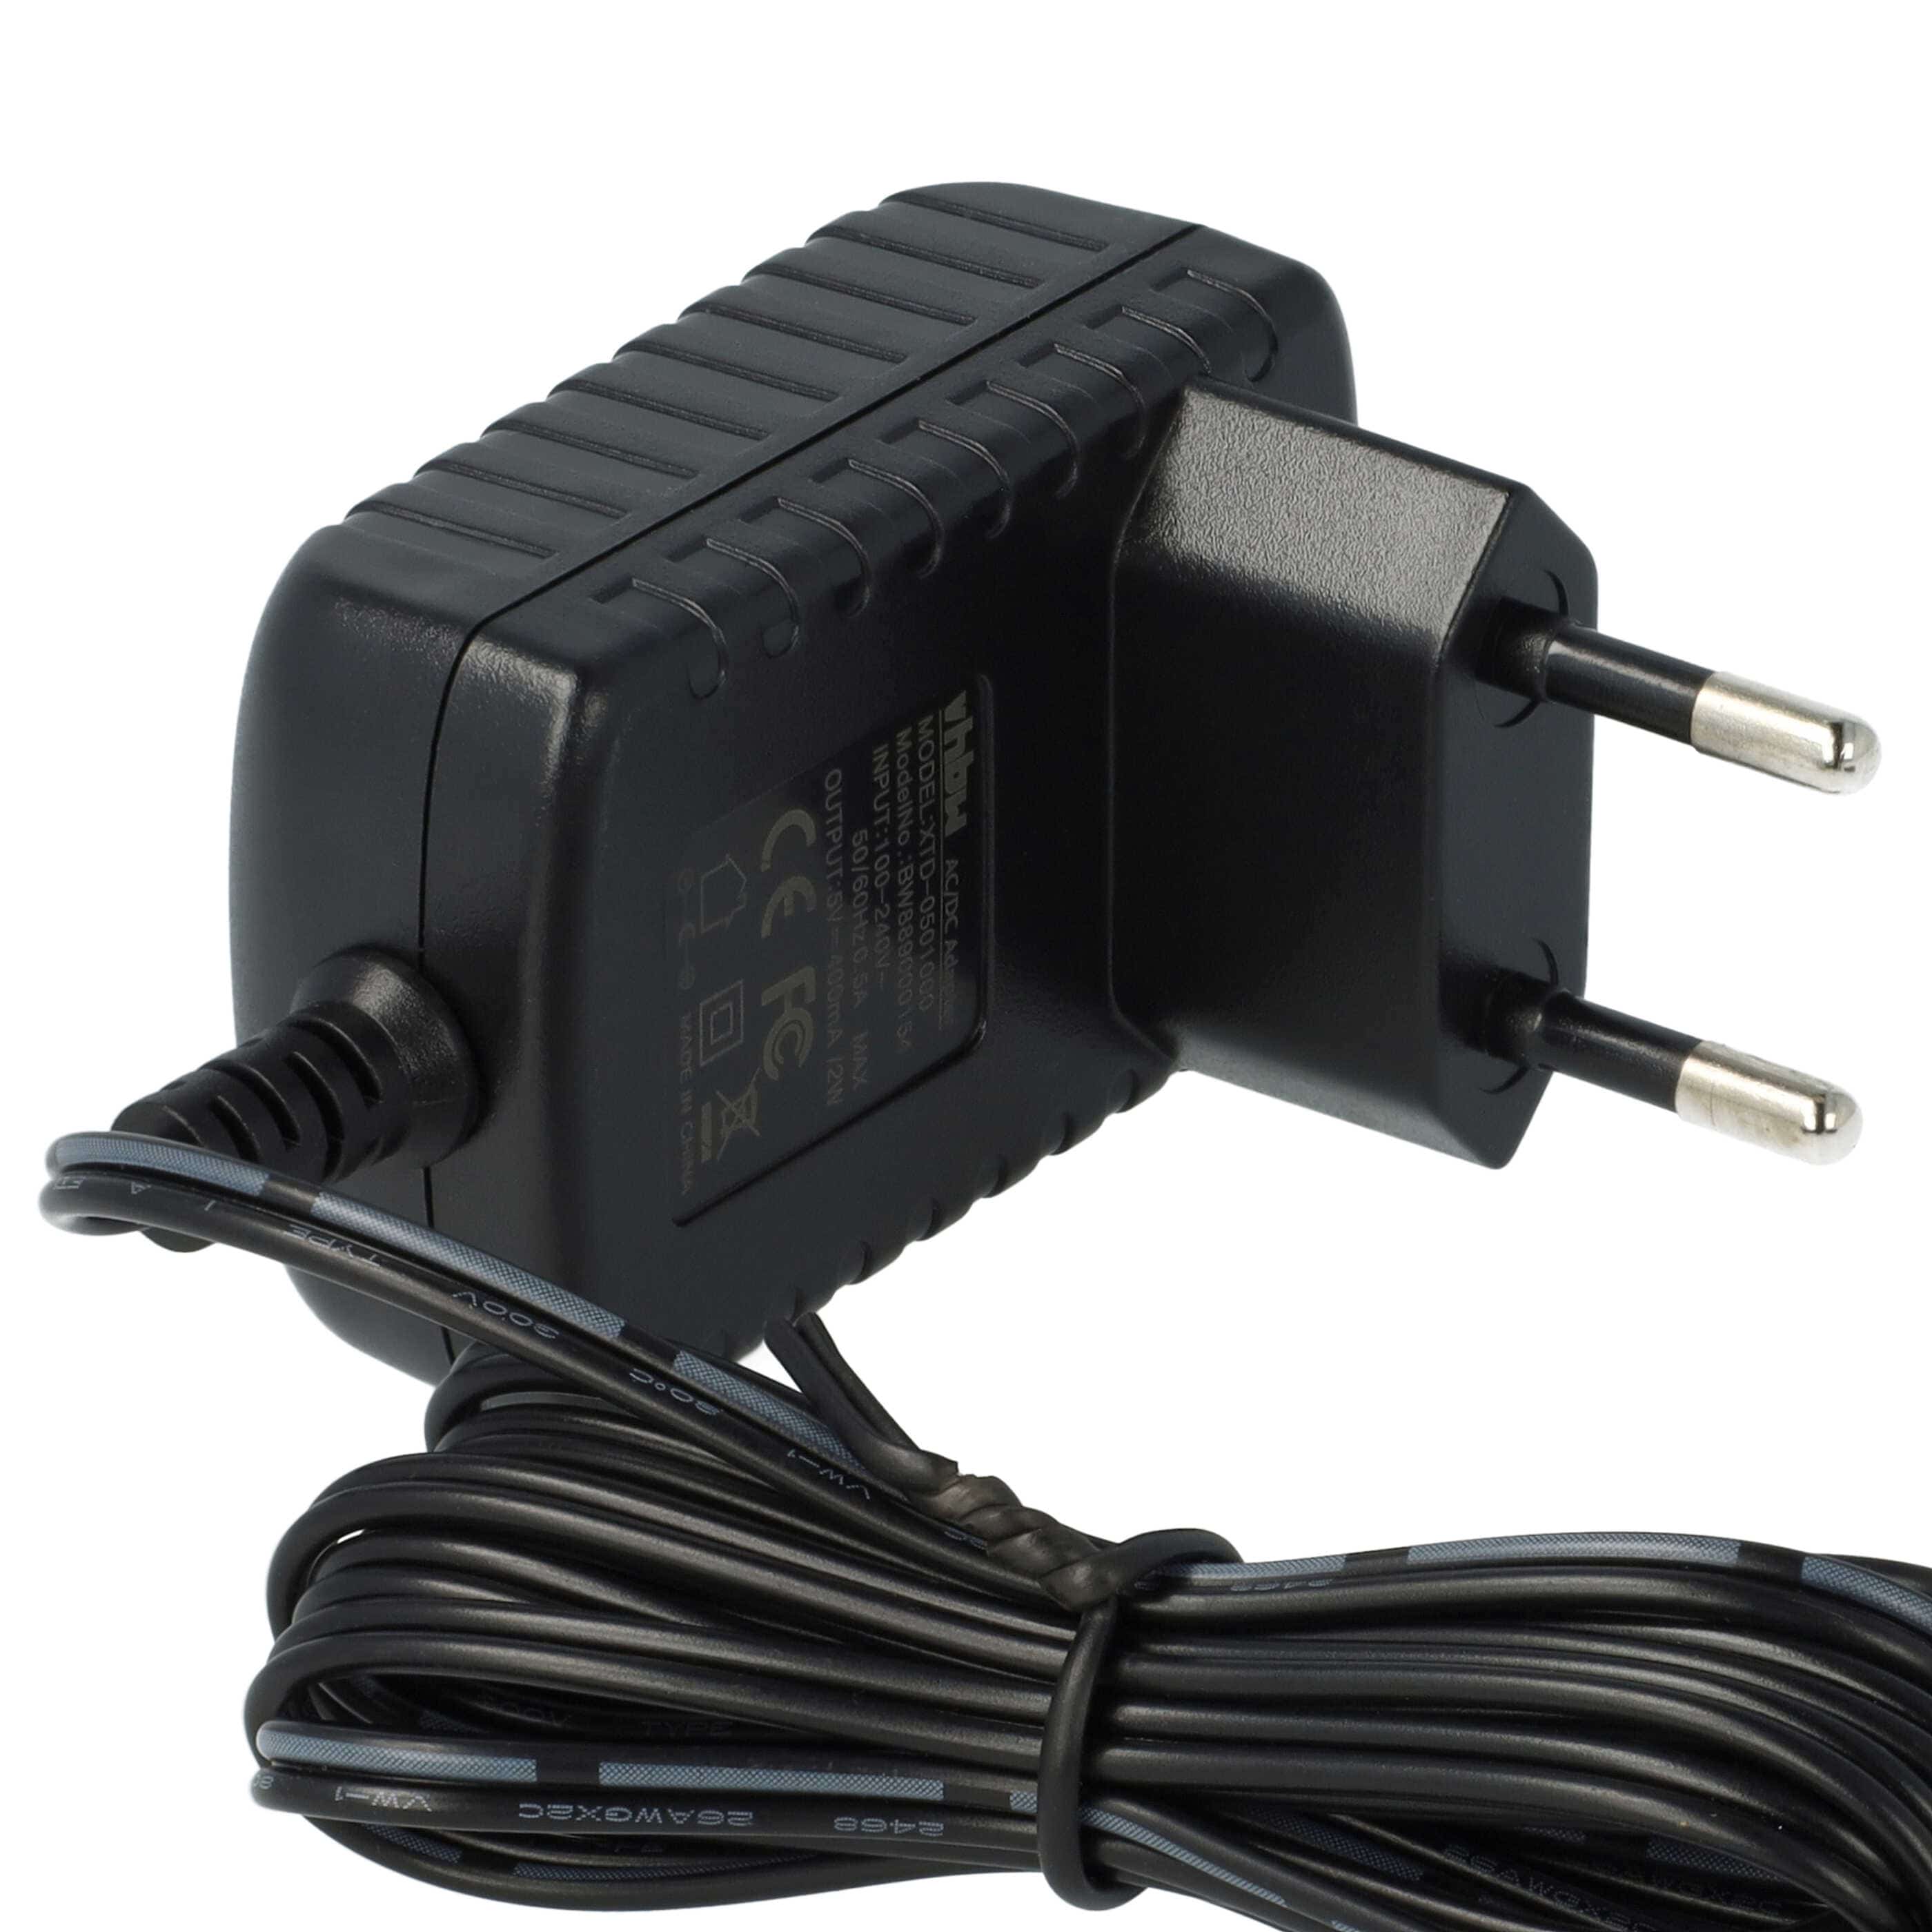 Mains Power Adapter replaces Gigaset C39280-Z4-C733 for Landline Telephone Charging Station - 150 cm